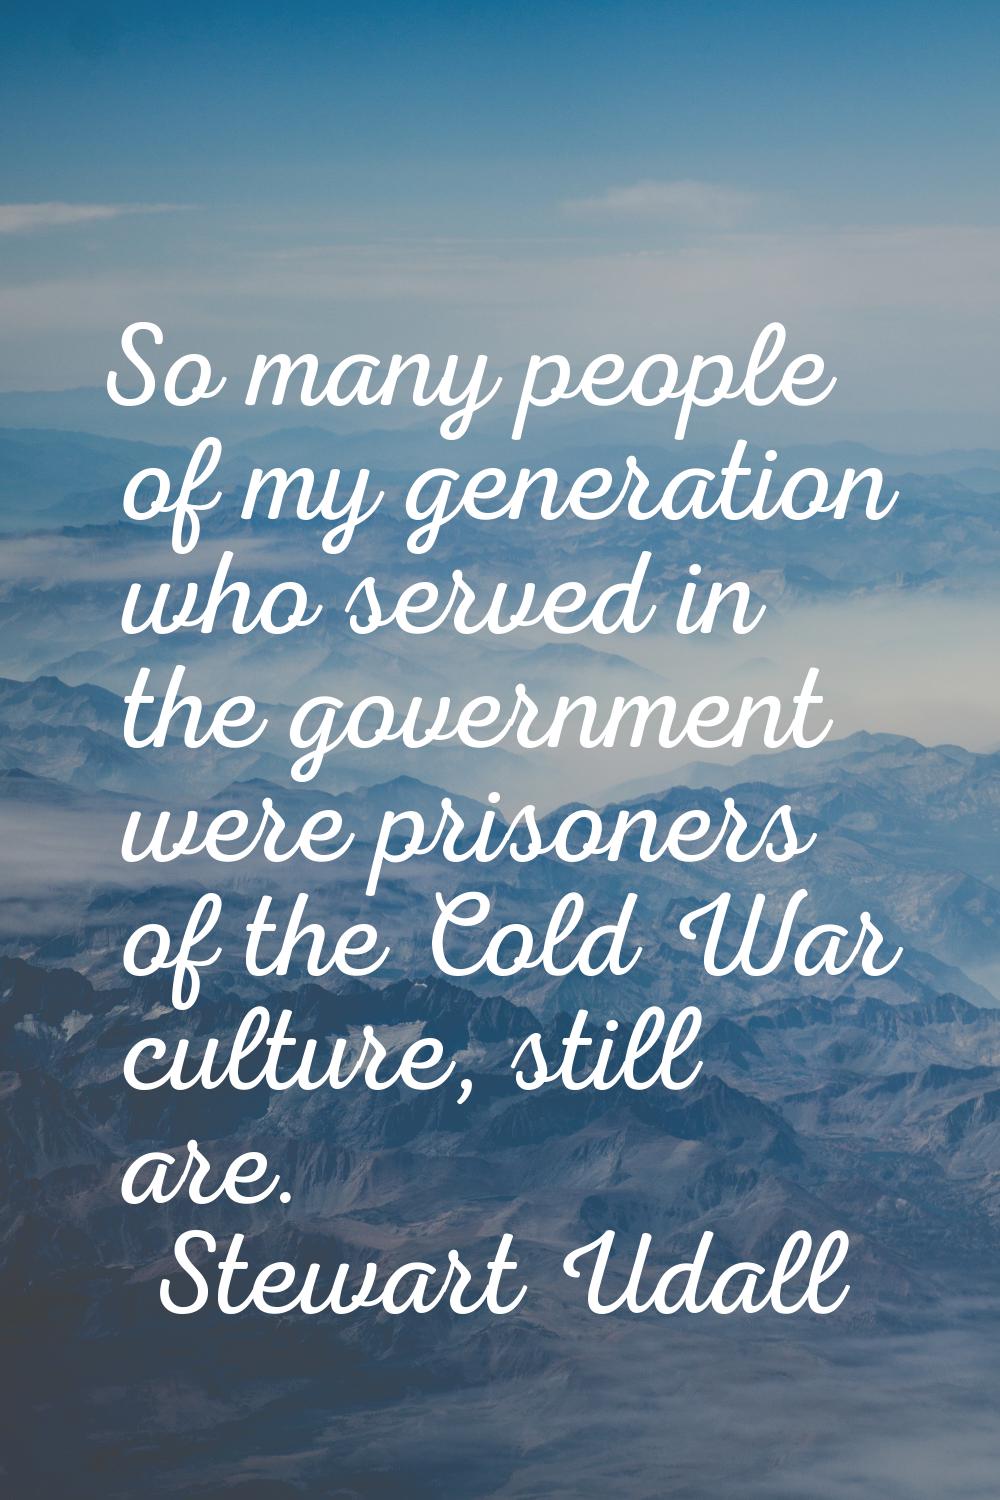 So many people of my generation who served in the government were prisoners of the Cold War culture